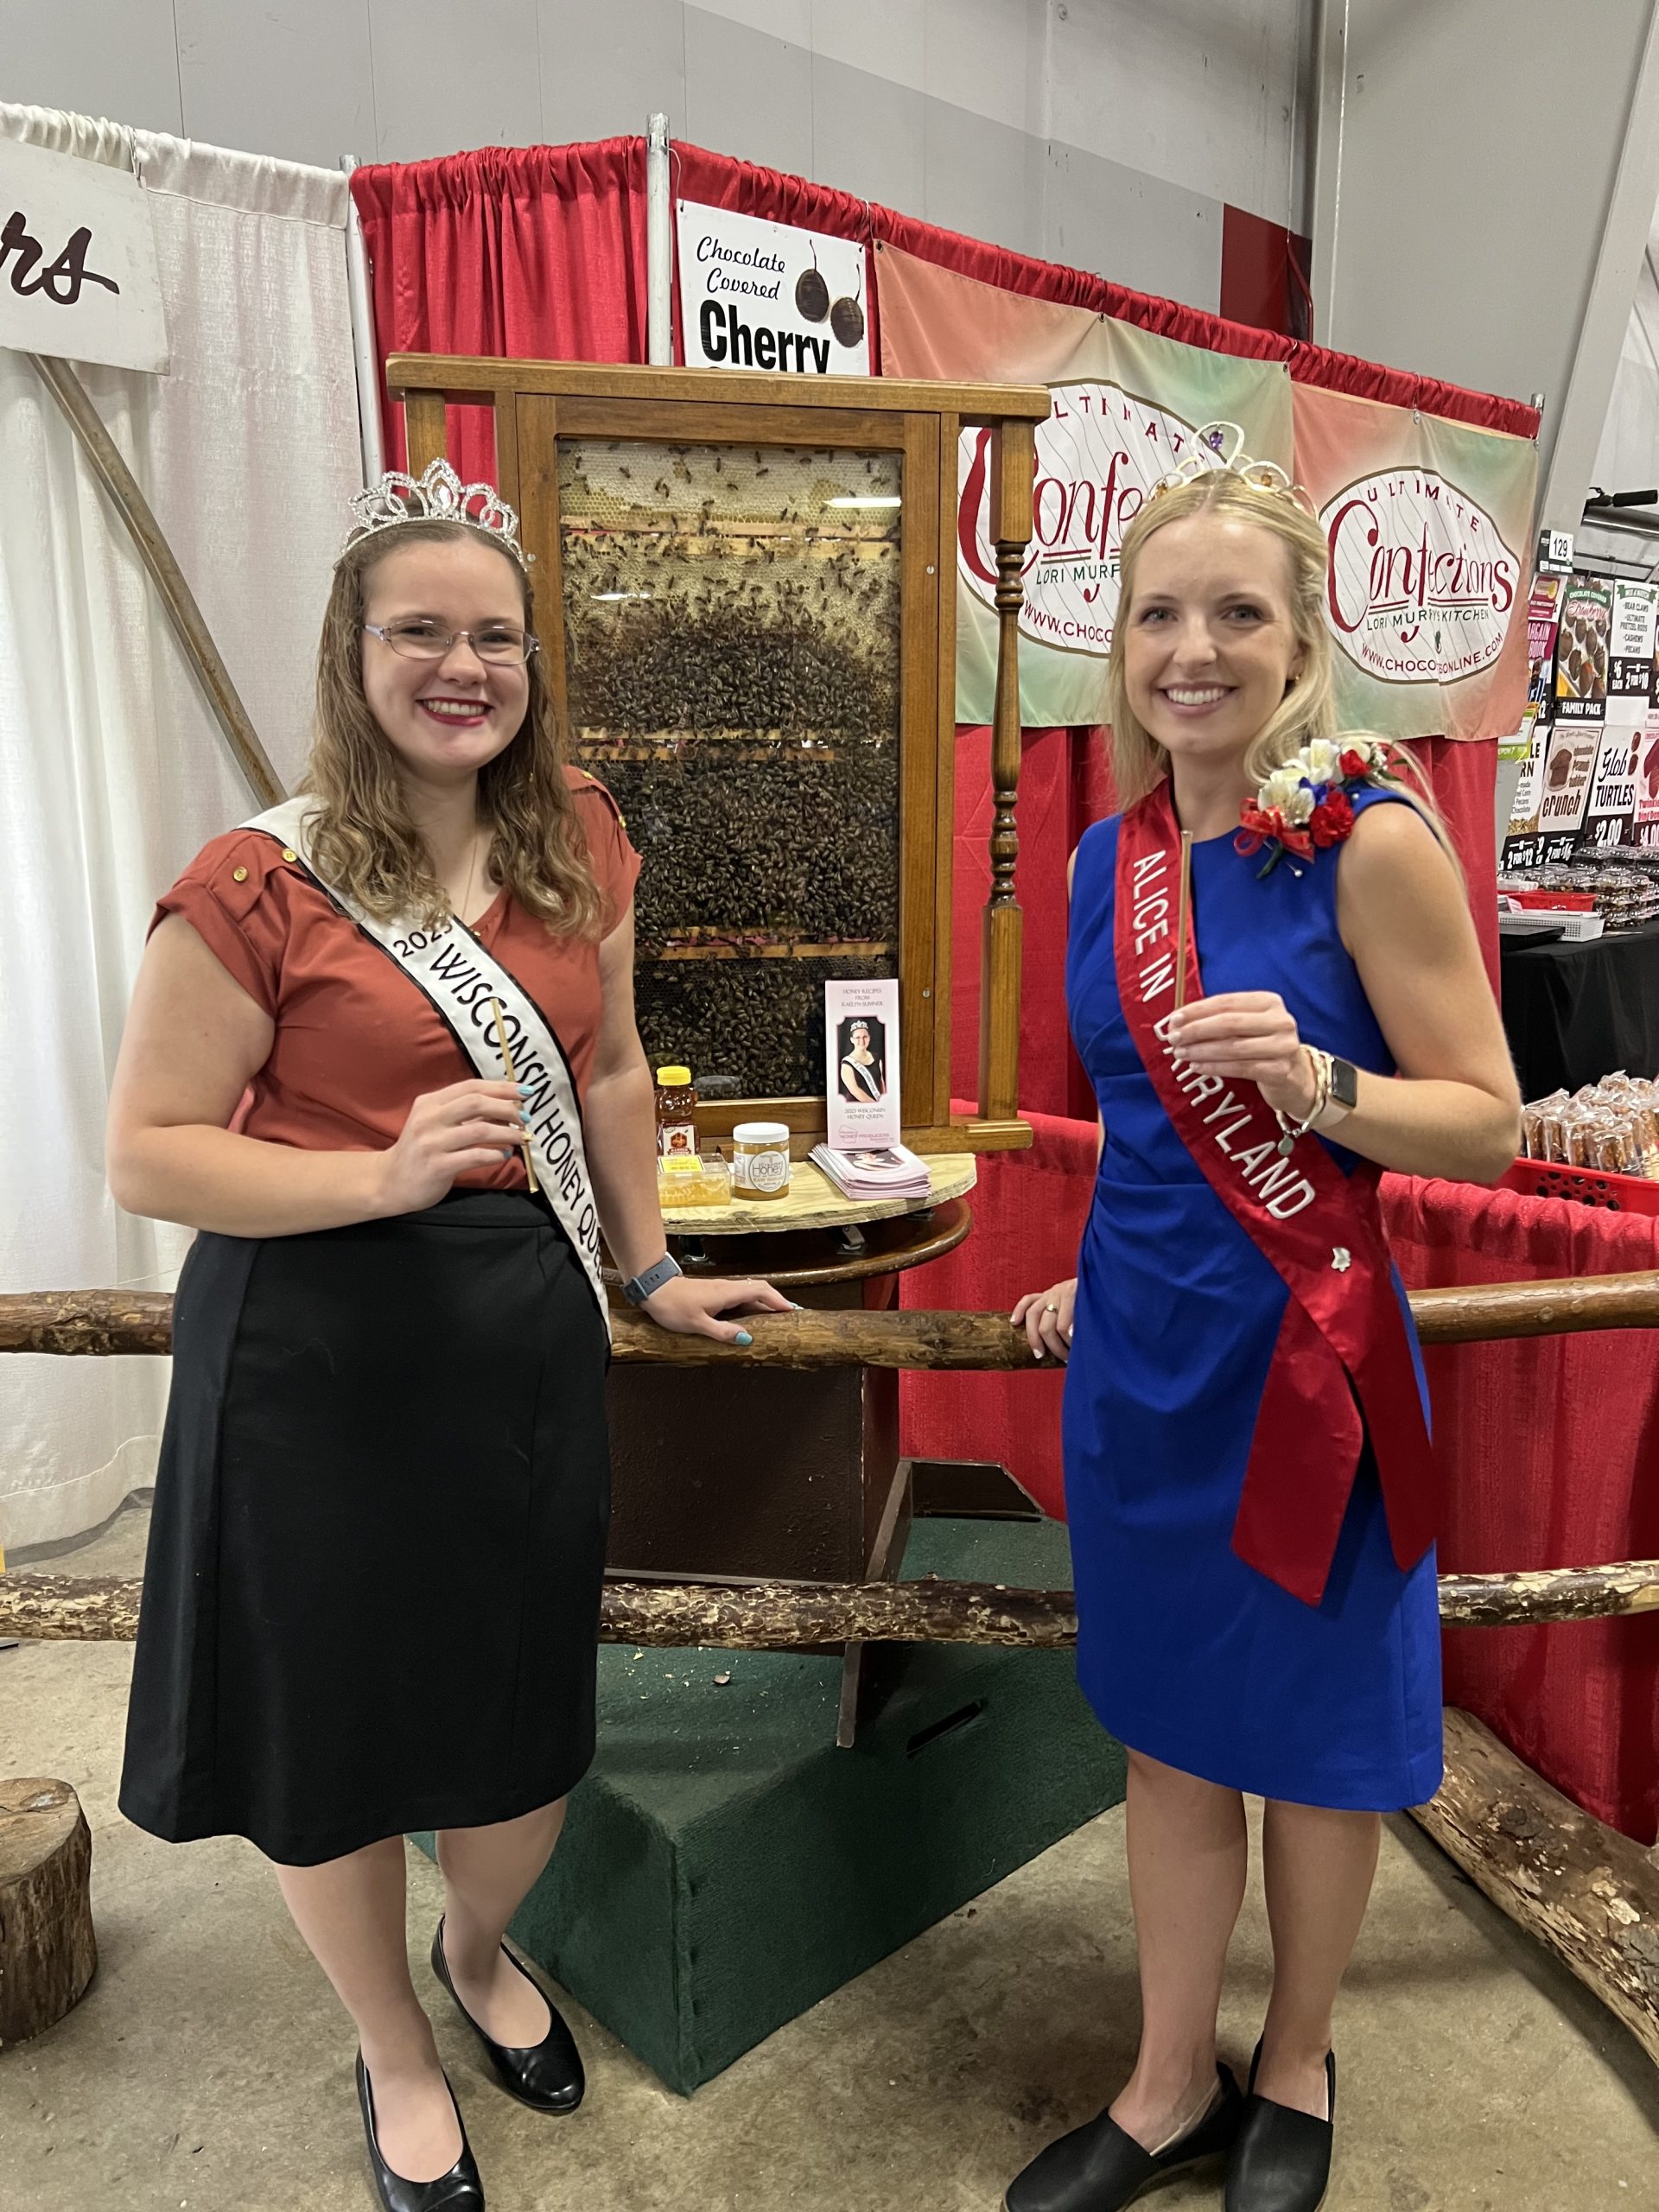 The Wisconsin Honey Queen and Alice in Dairyland showcasing honey products during the Wisconsin State Fair.